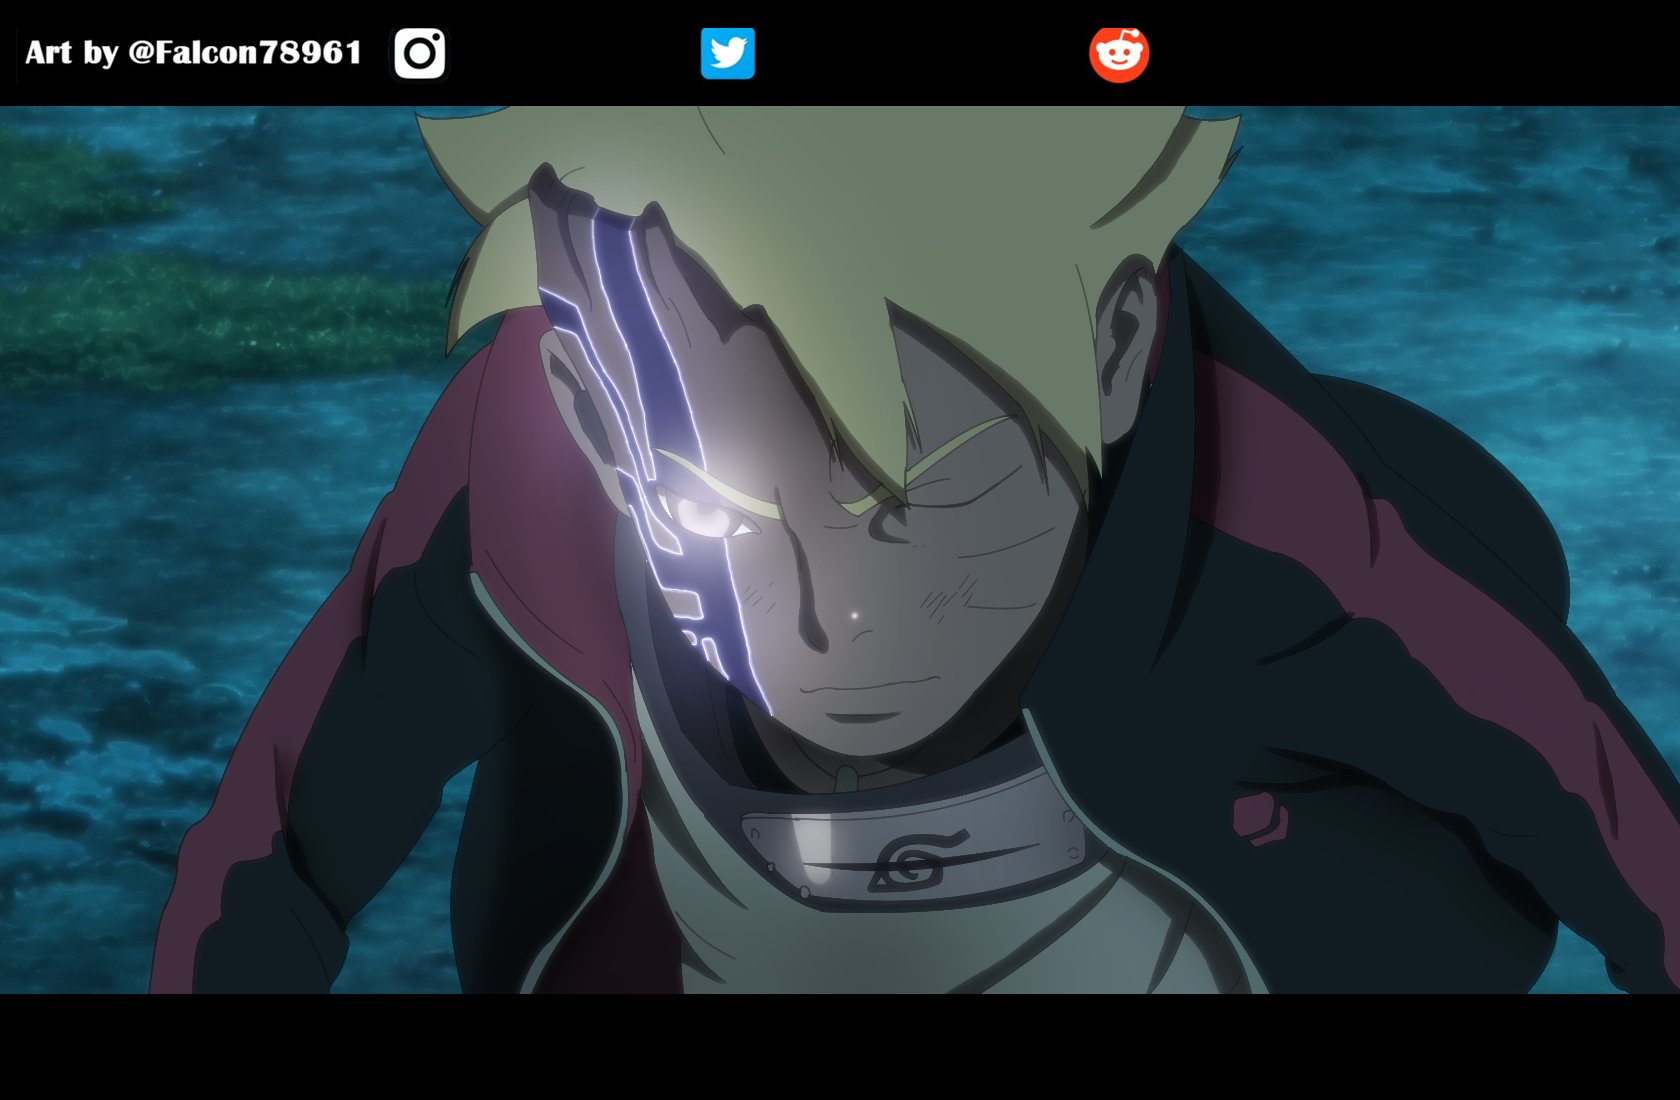 Boruto Episode 267 Release Date, Spoilers, and Other Details